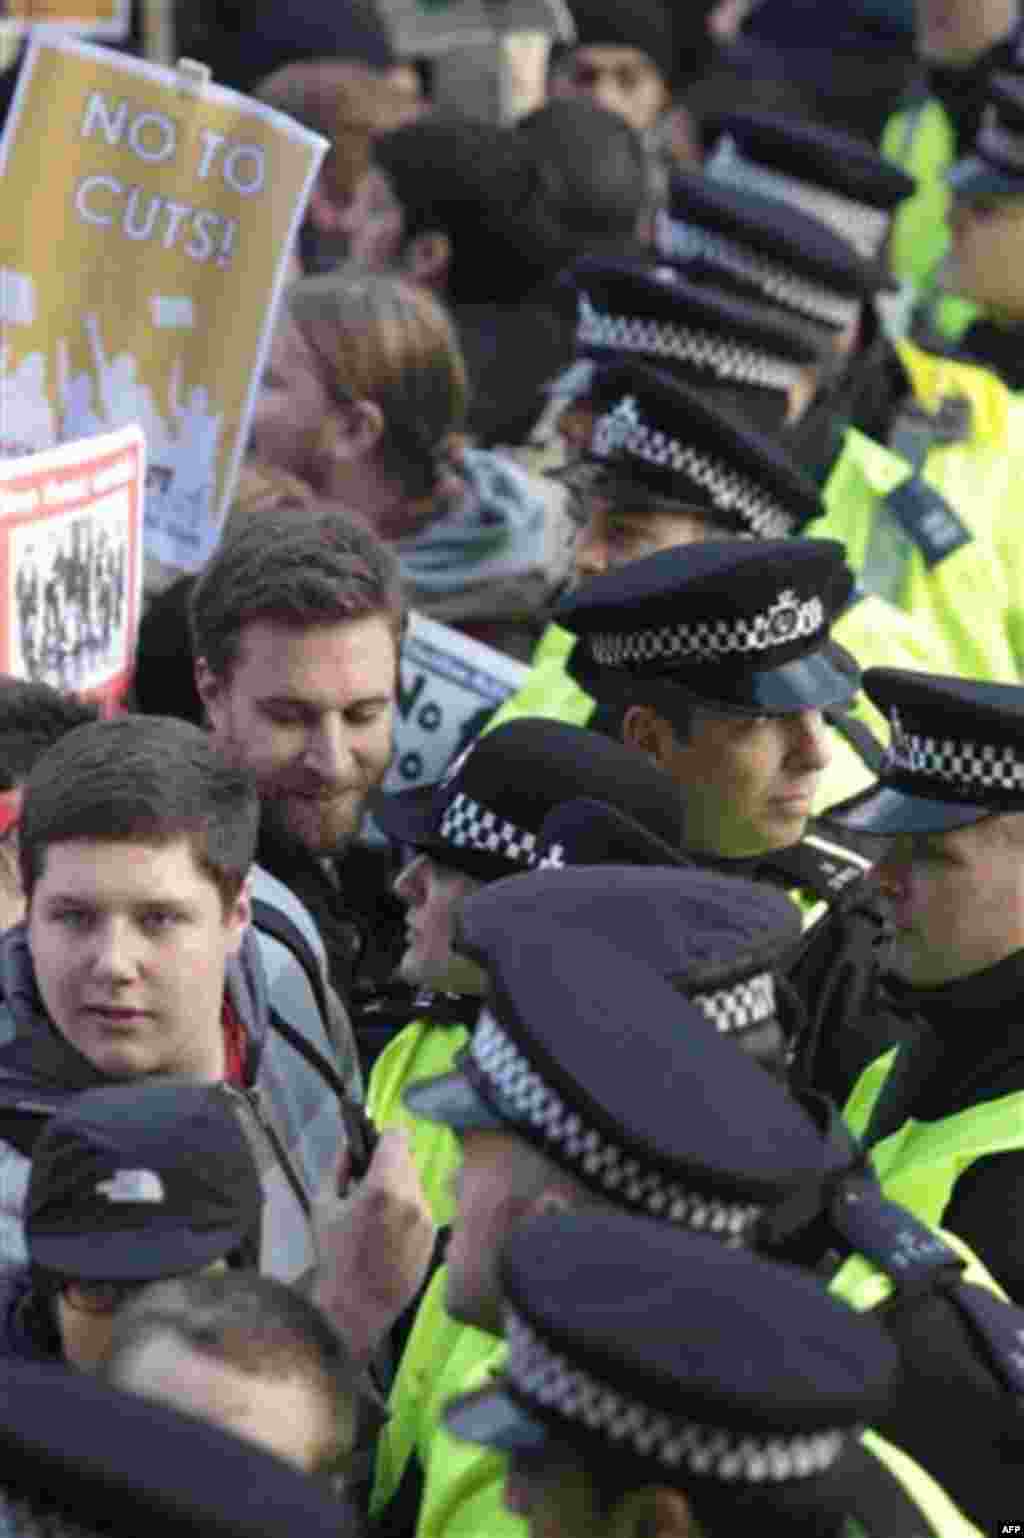 Protesters face the police as thousands of students protest against tuition fees at Whitehall in London, Wednesday, Nov. 24, 2010. Several thousand students protested against government plans to triple tuition fees, two weeks after a similar demonstration